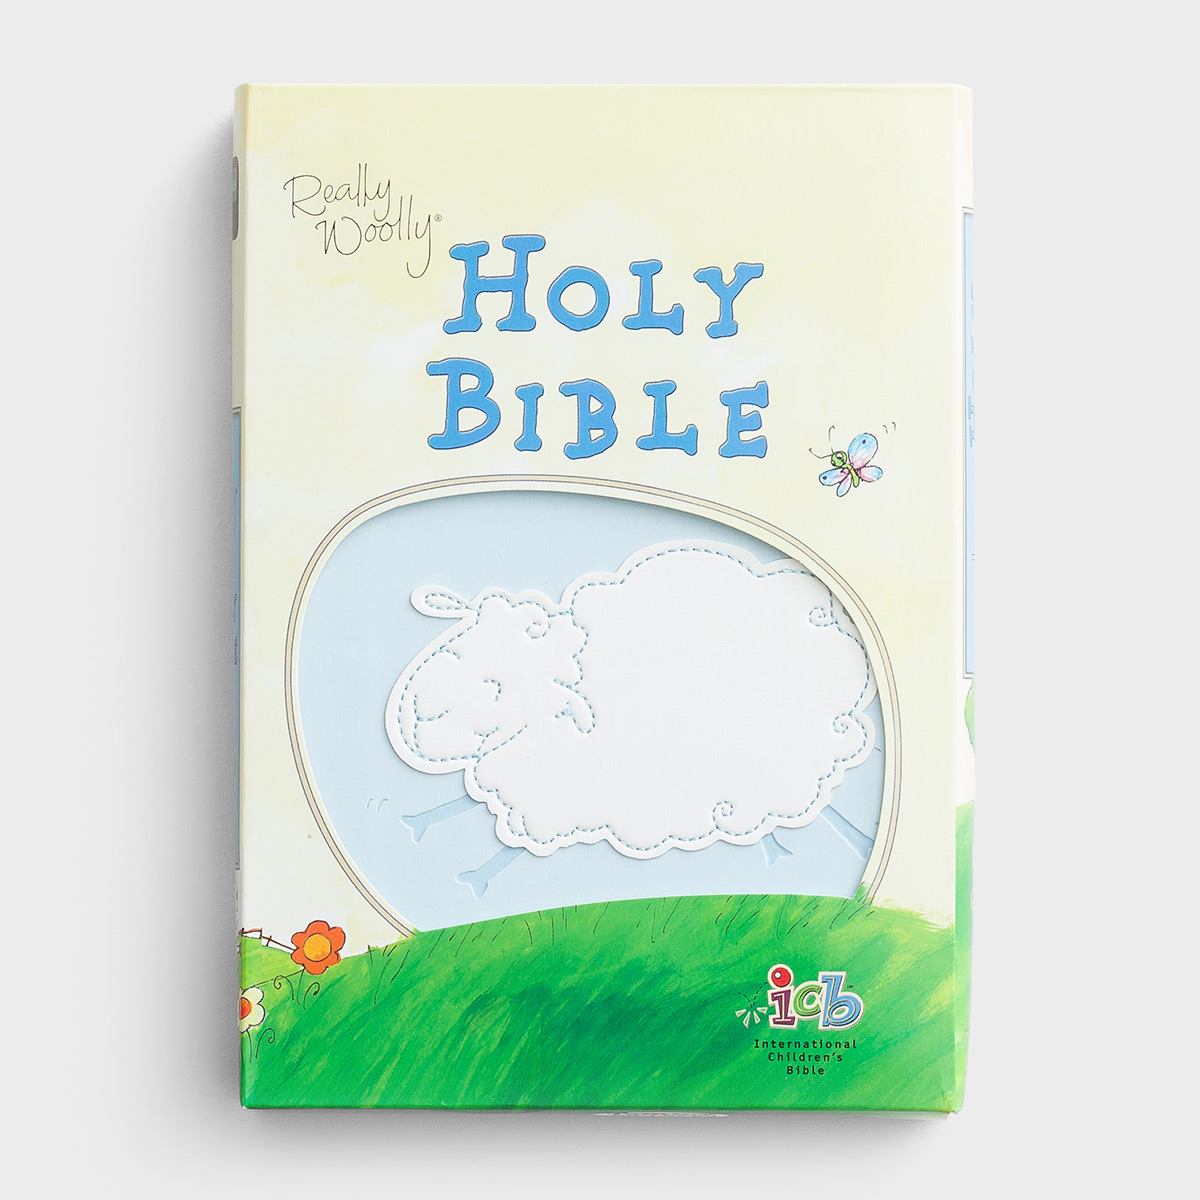 ICB Really Woolly® Children's Bible - Blue Leather Soft